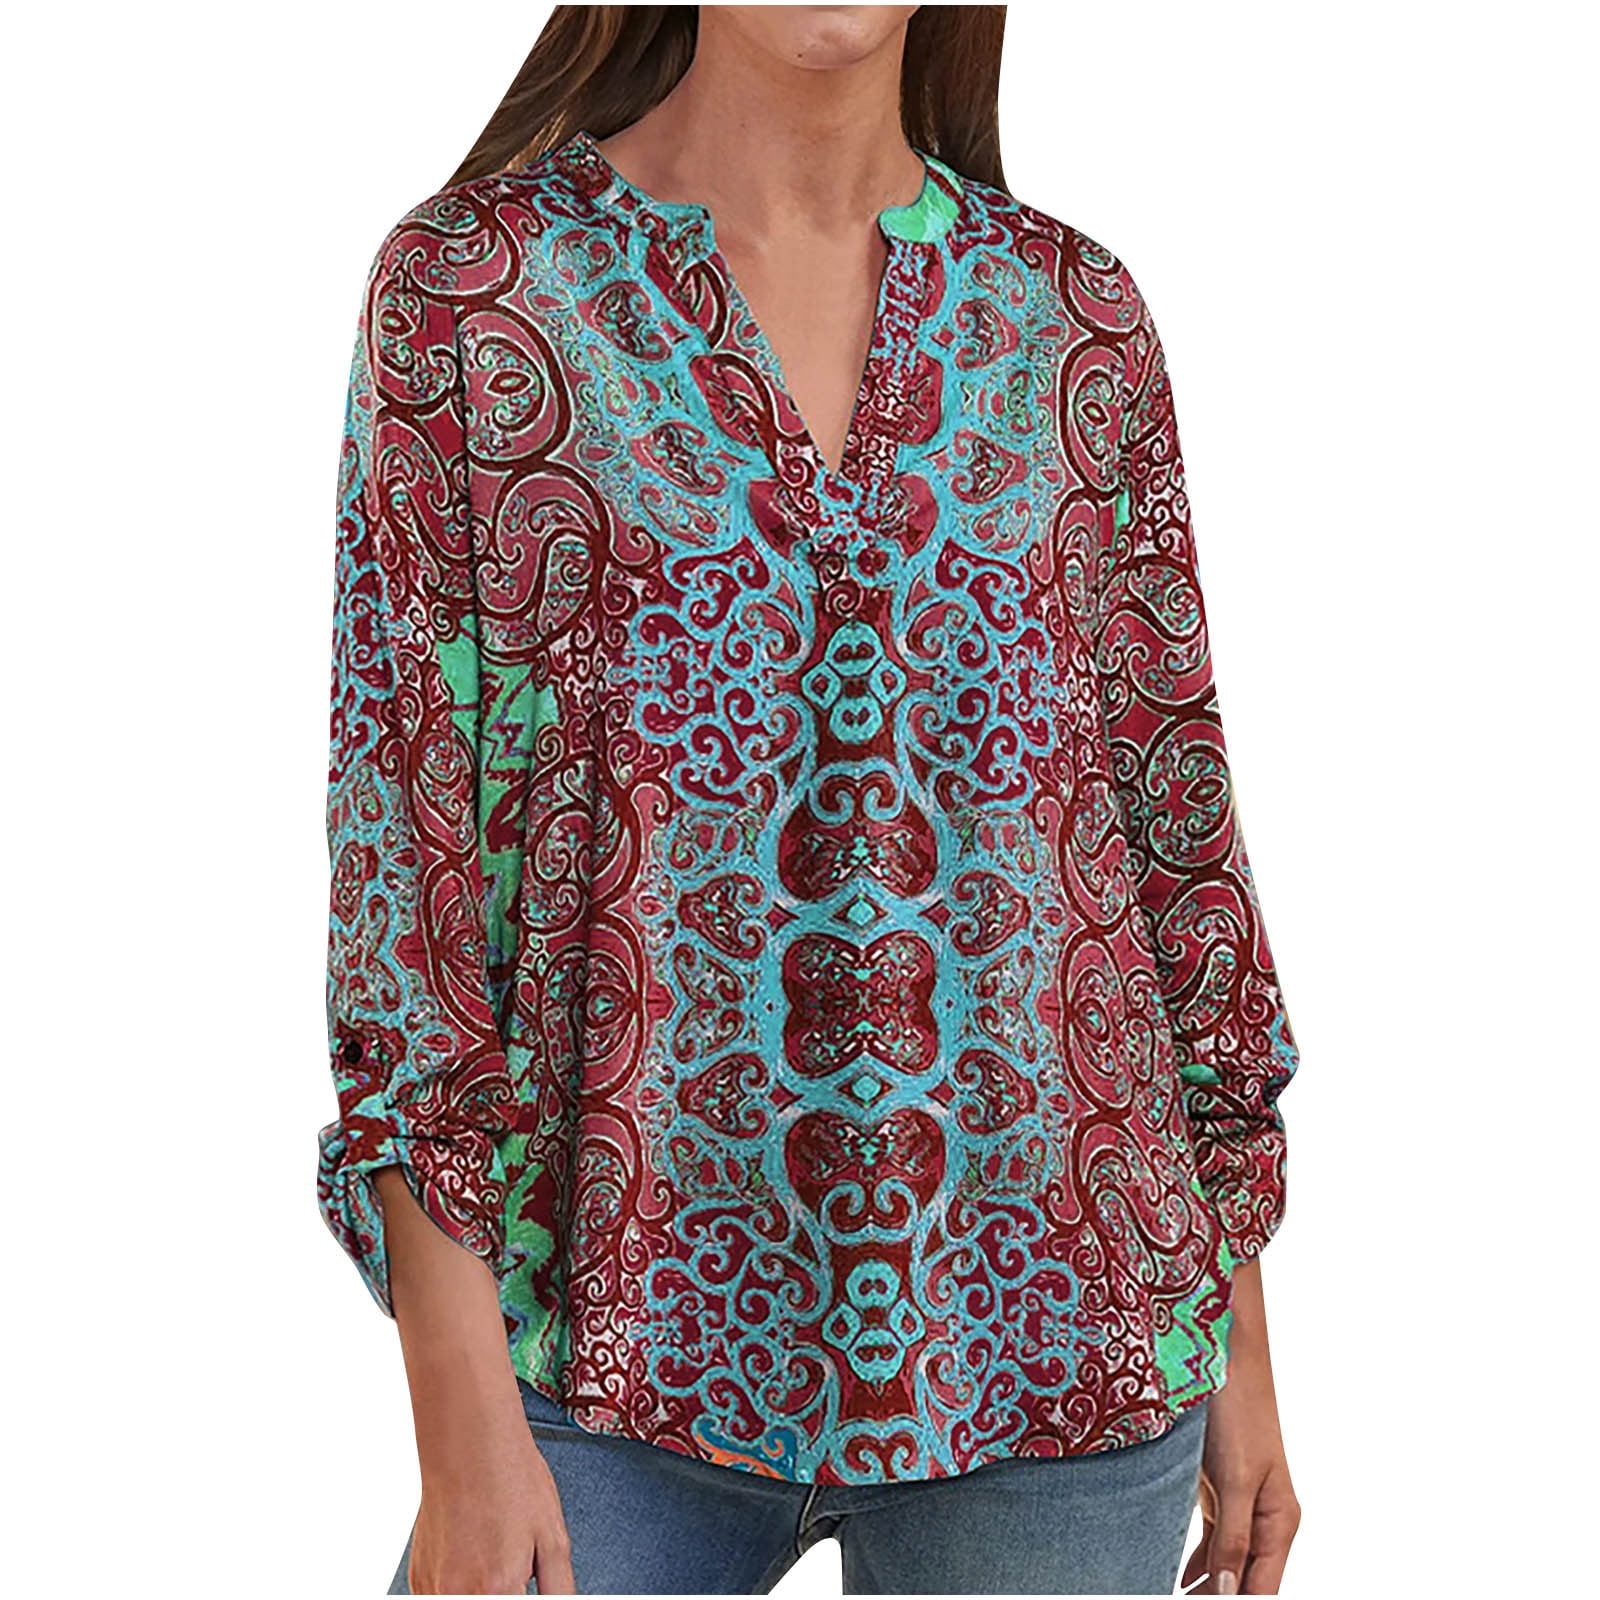 Taqqpue Womens Plus Size V Neck Boho Floral Print Tunic Tops Casual ...